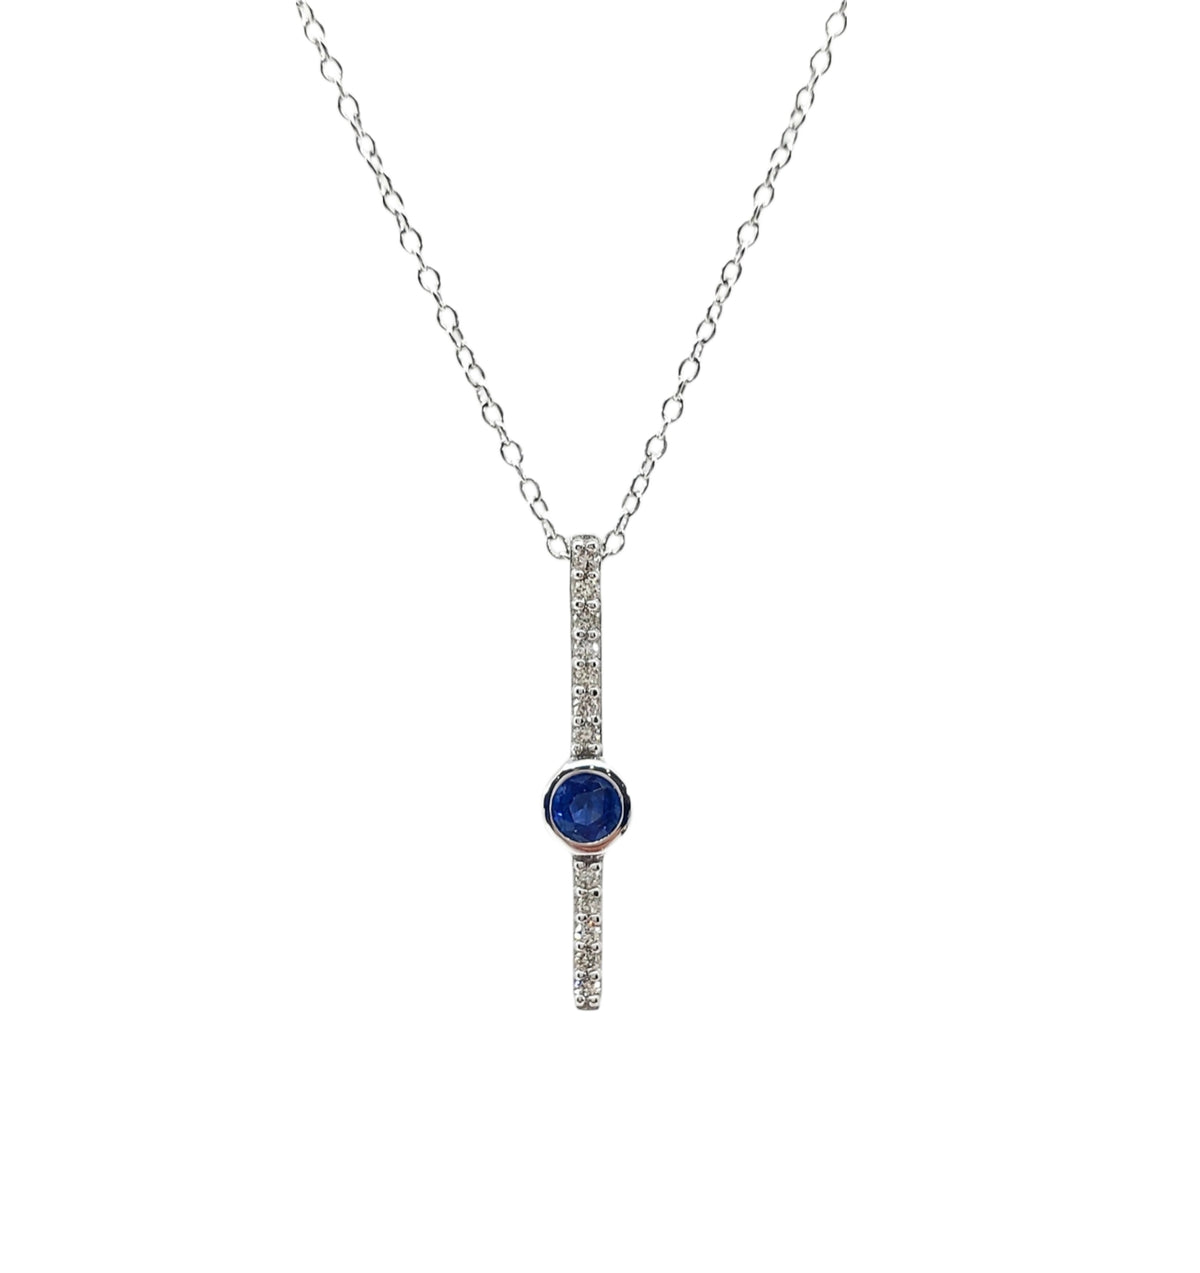 10K White Gold 0.08cttw (2.50mm) Sapphire and 0.05cttw Diamond Necklace with Cable Chain (Spring Clasp) - Adjustable 17 - 18 Inches